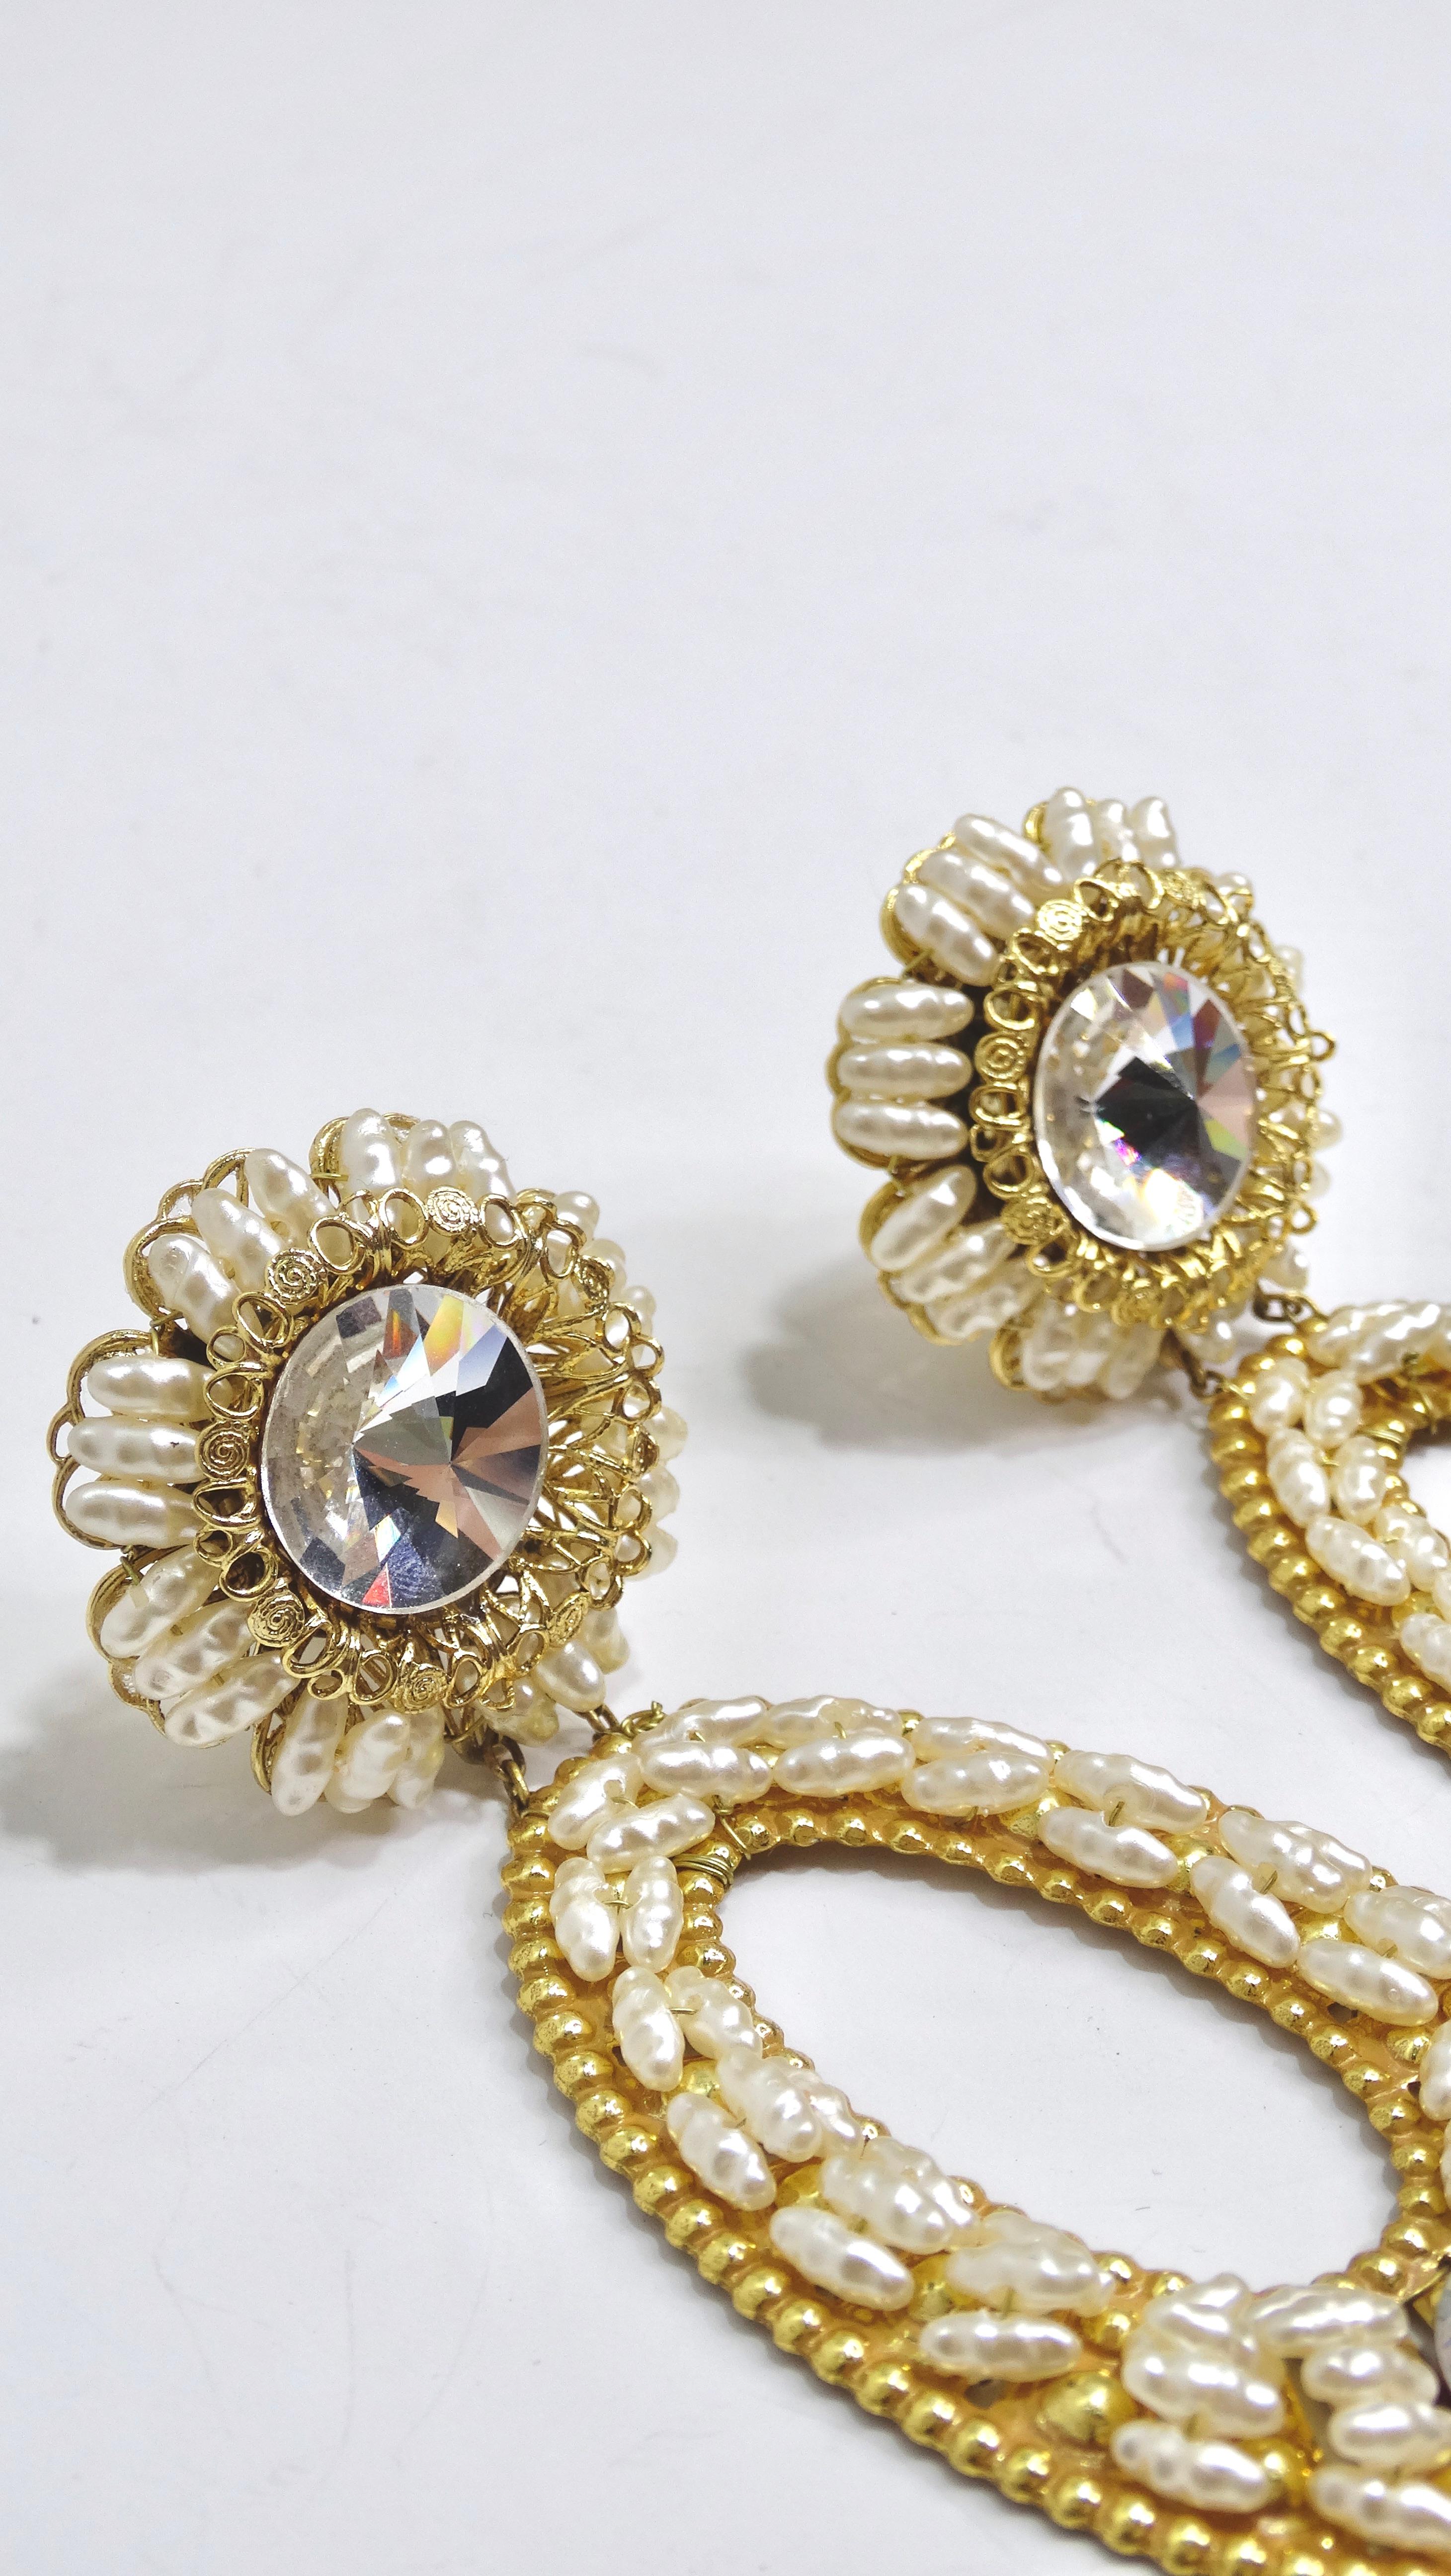 Lawrence Vrba Beaded Crystal Statement Earrings In Excellent Condition For Sale In Scottsdale, AZ